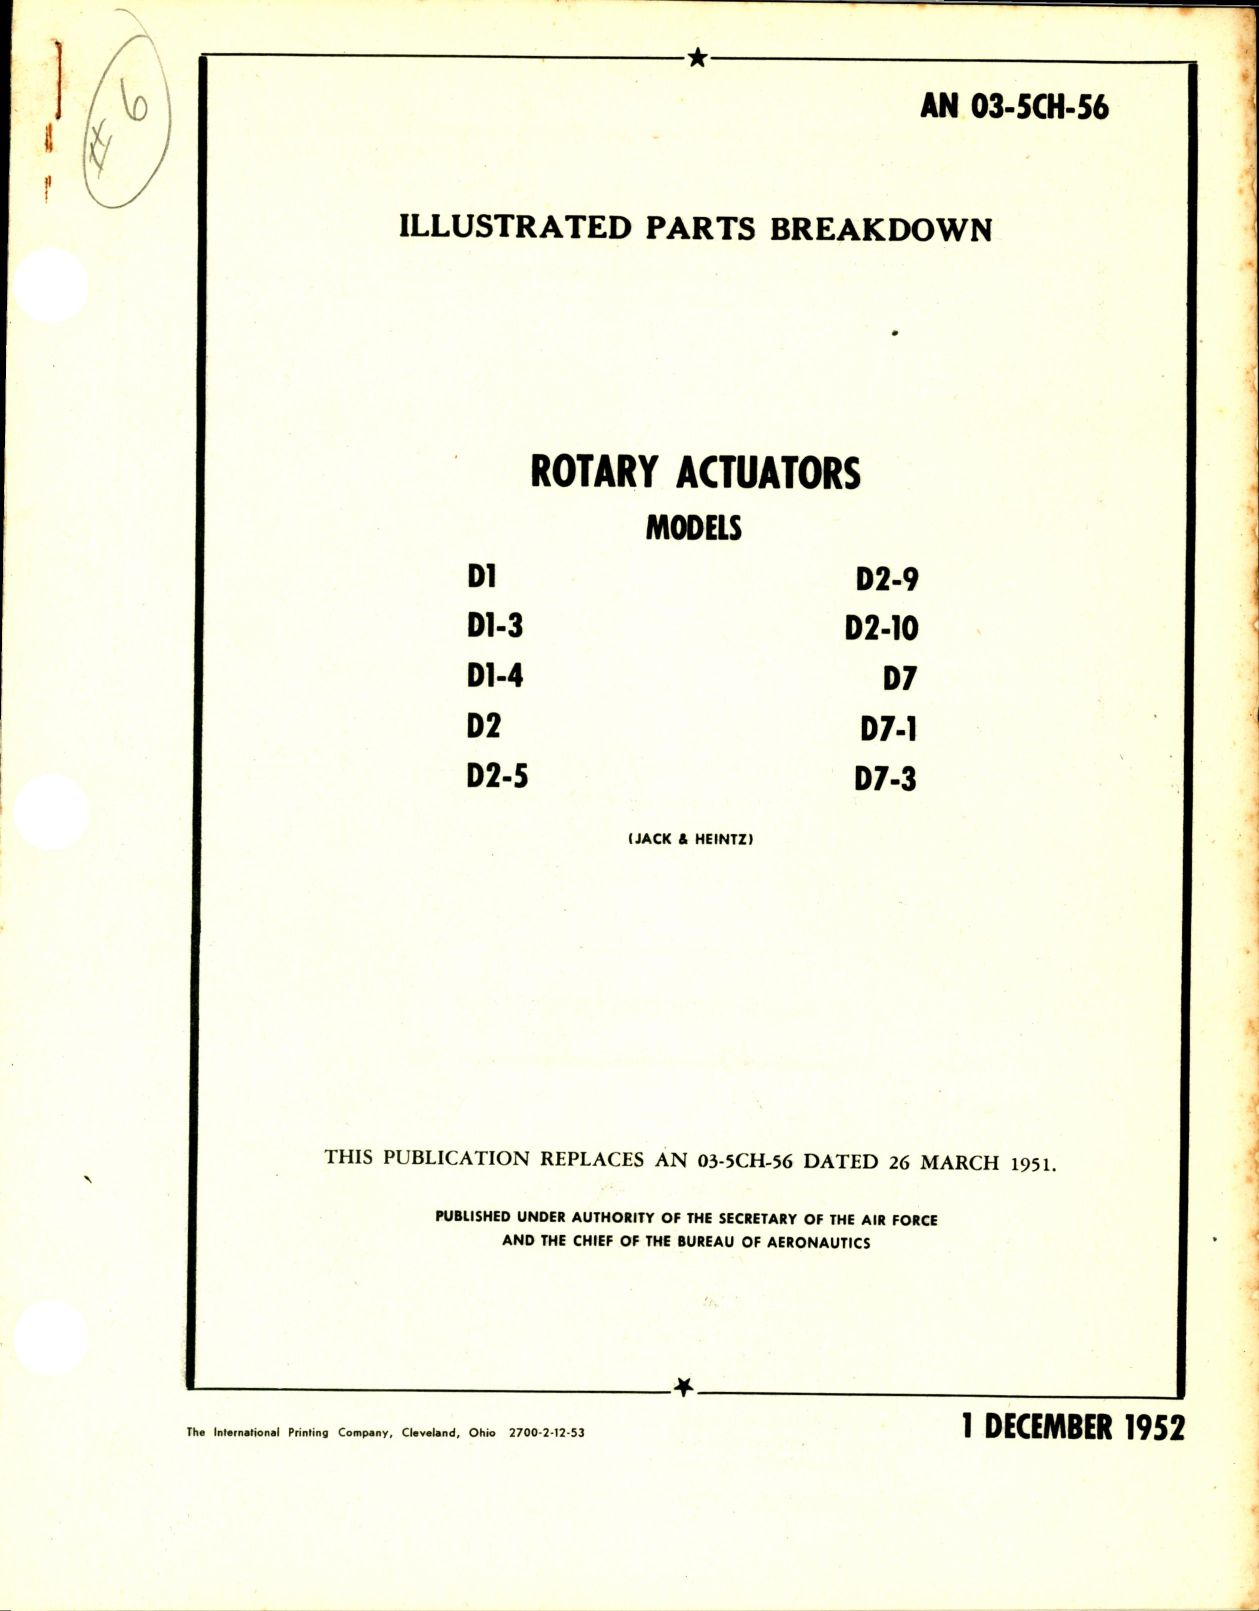 Sample page 1 from AirCorps Library document: Parts Breakdown for Rotary Actuators Models D1, D2, and D7